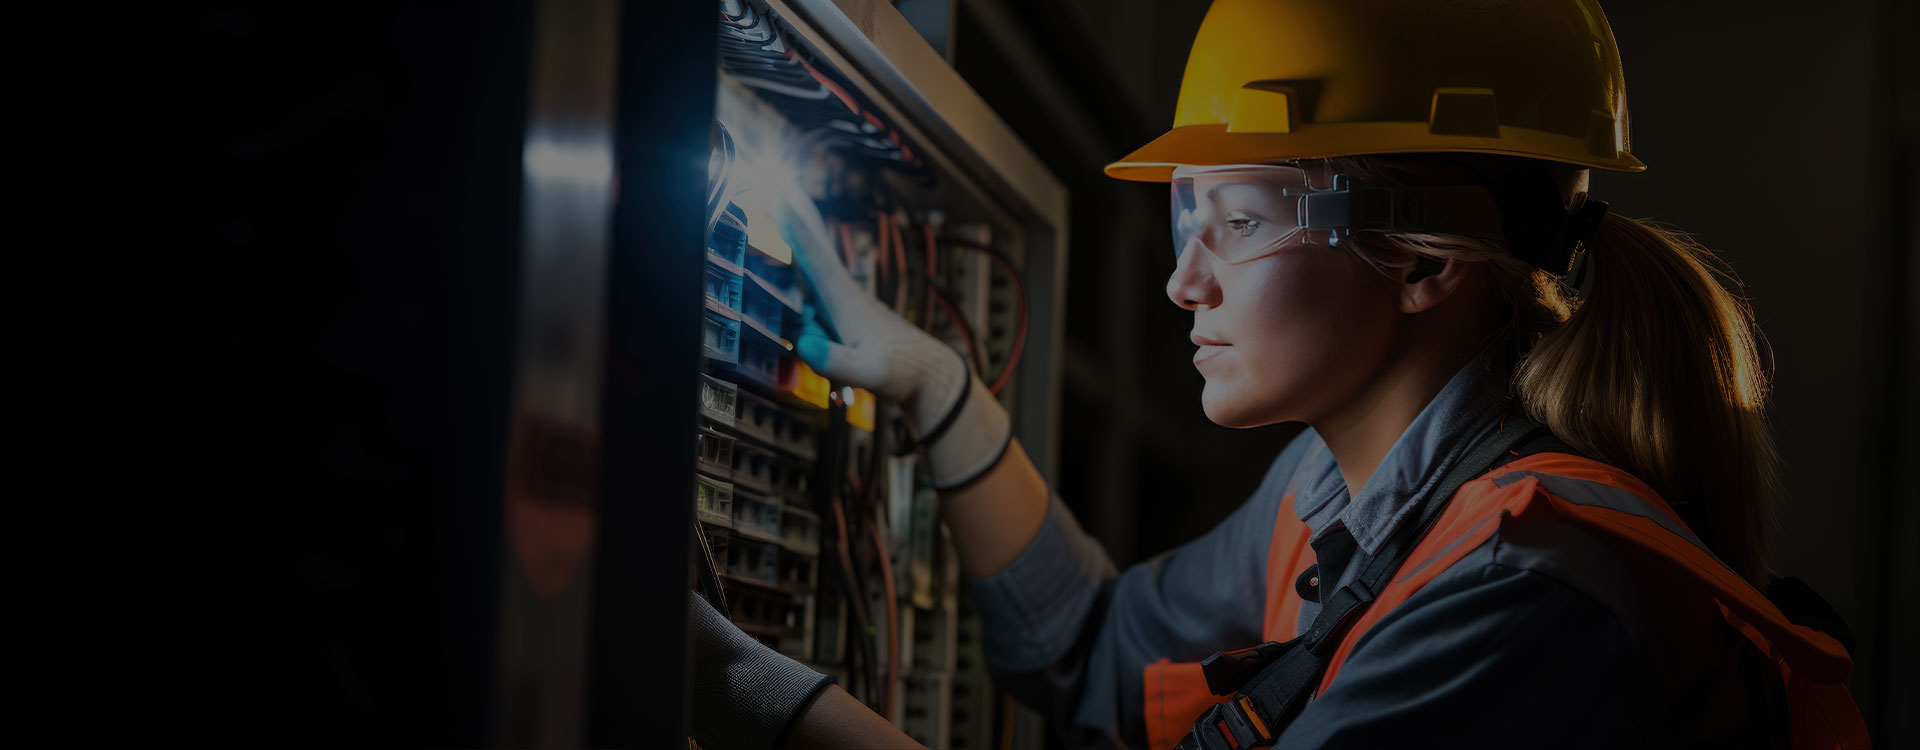 A woman in a hard hat is working on an electrical panel.